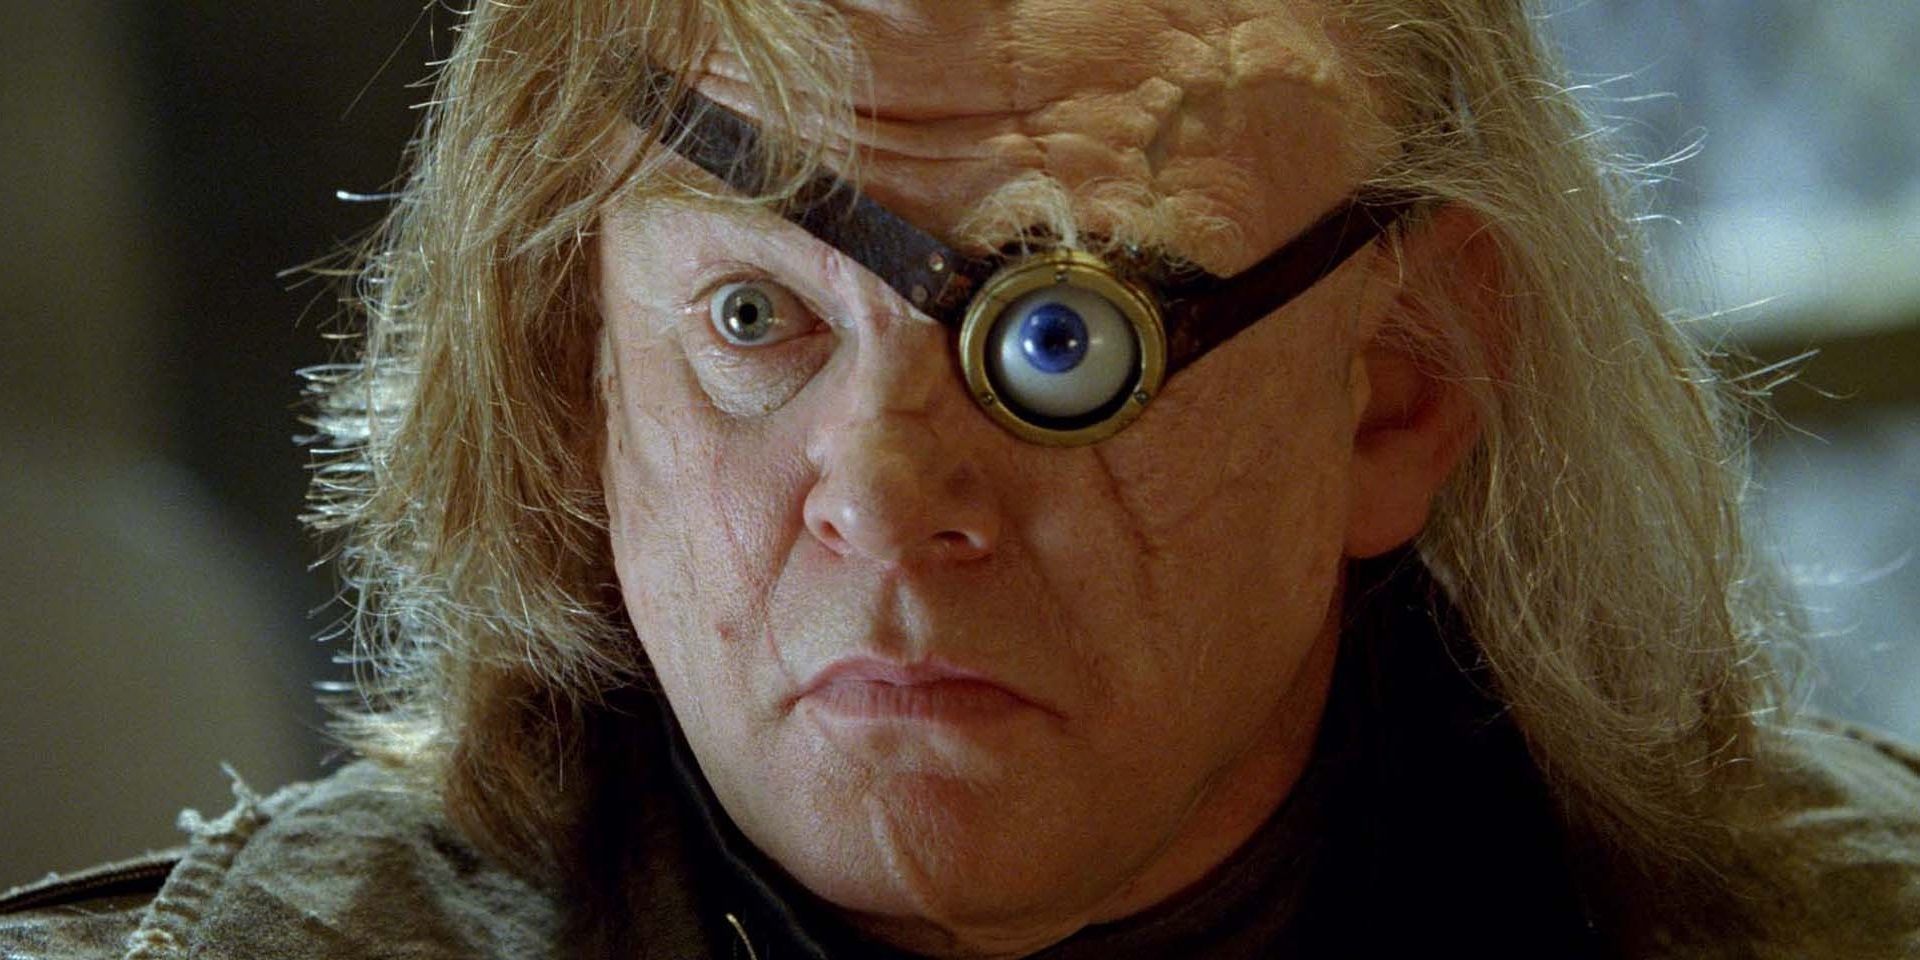 Alastor &quot;Mad Eye&quot; Moody, the world renowned Auror